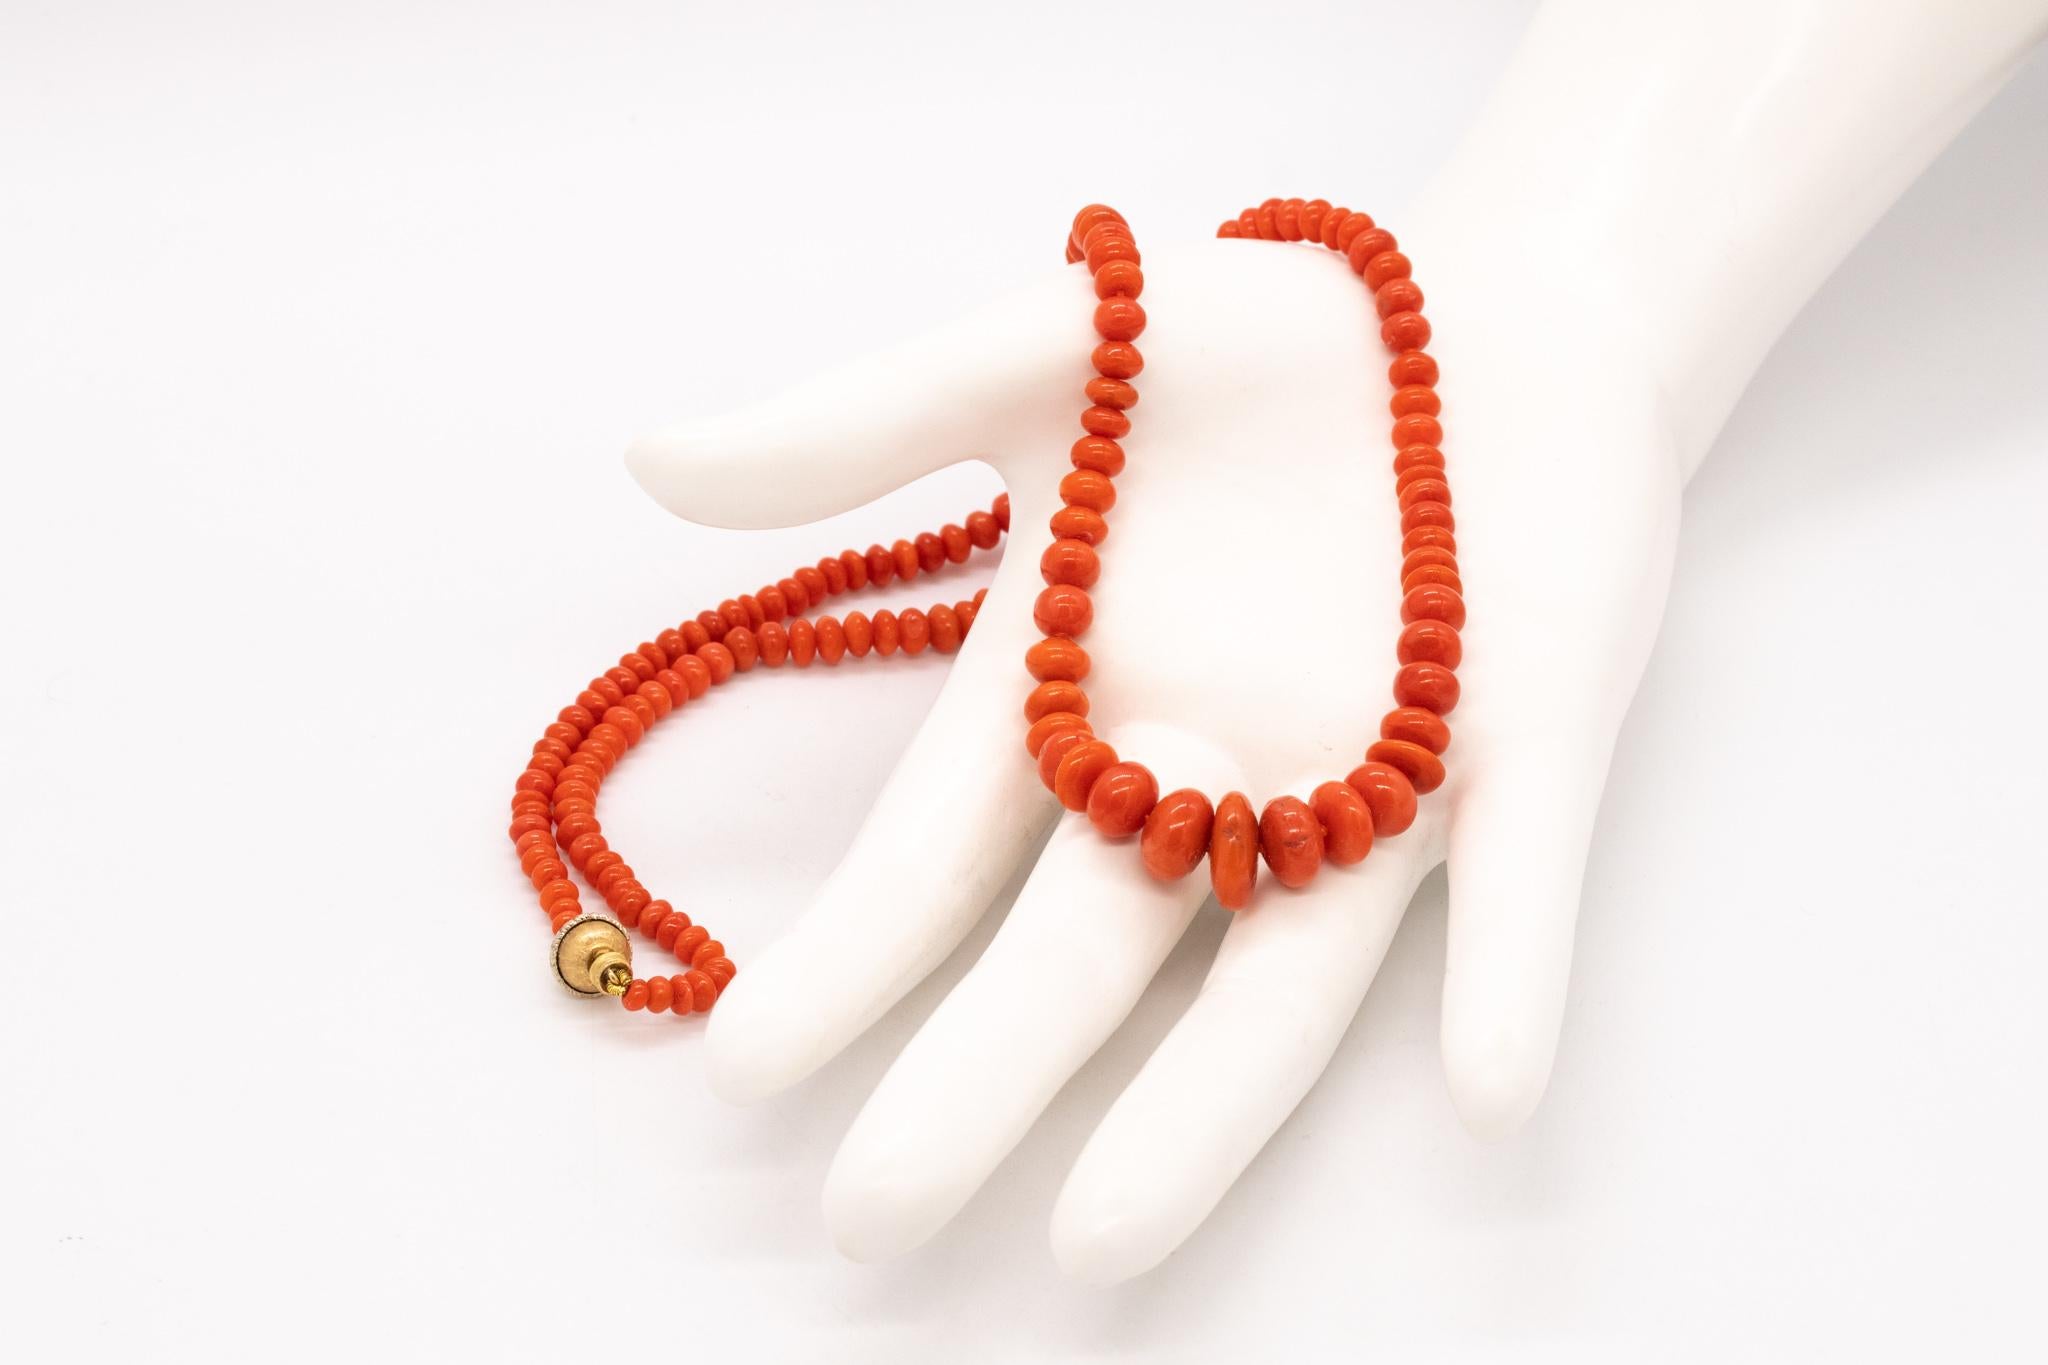 A graduated coral necklace designed by Mario Buccellati.

Beautiful piece mounted with 160 graduated round cabochons cut of natural Sardinian red coral. This necklace is suited at the ends with a screw lock crafted in 18 karats yellow gold and